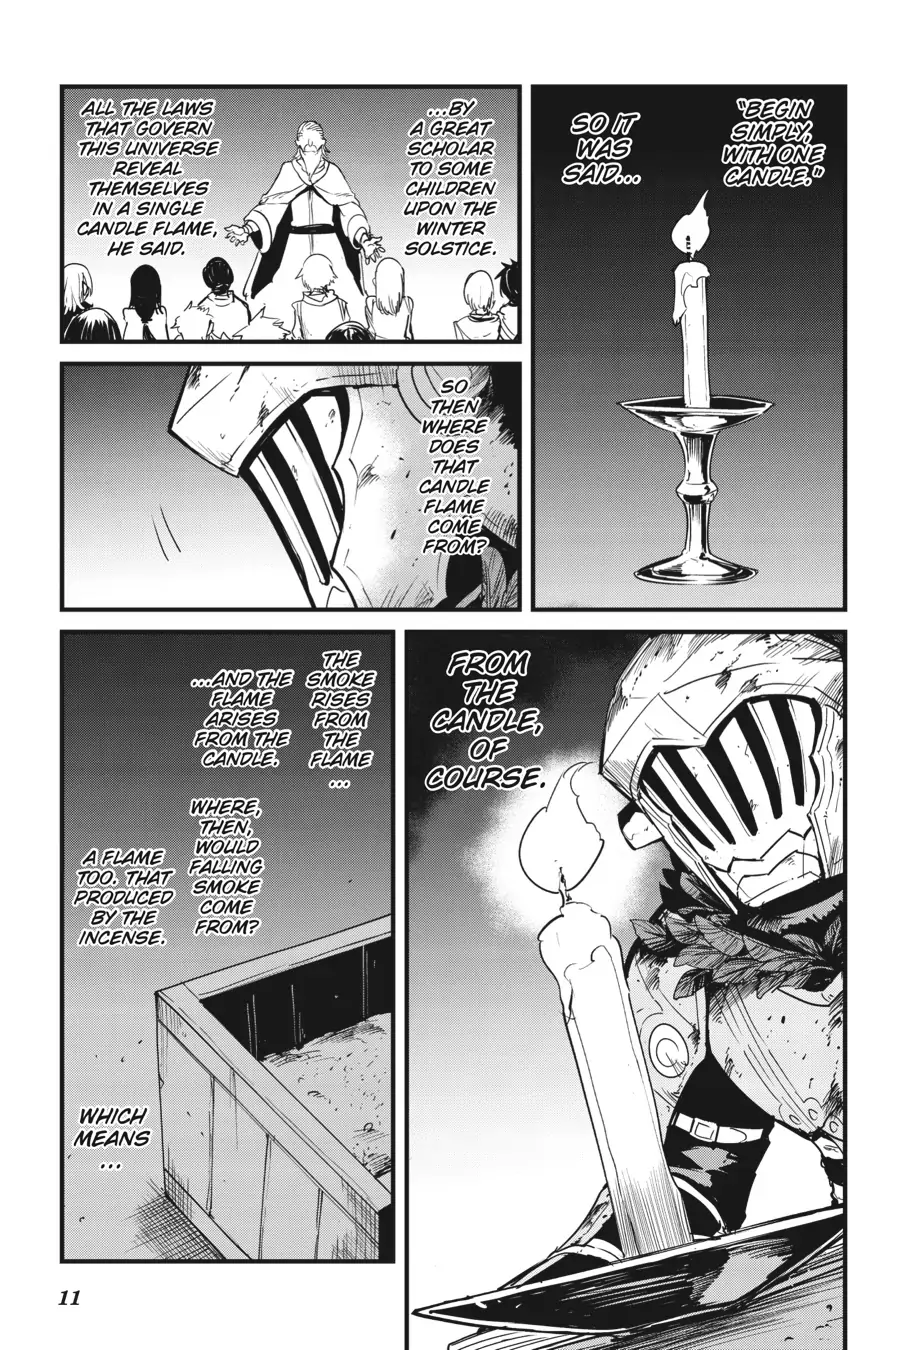 Goblin Slayer: Side Story Year One chapter 83